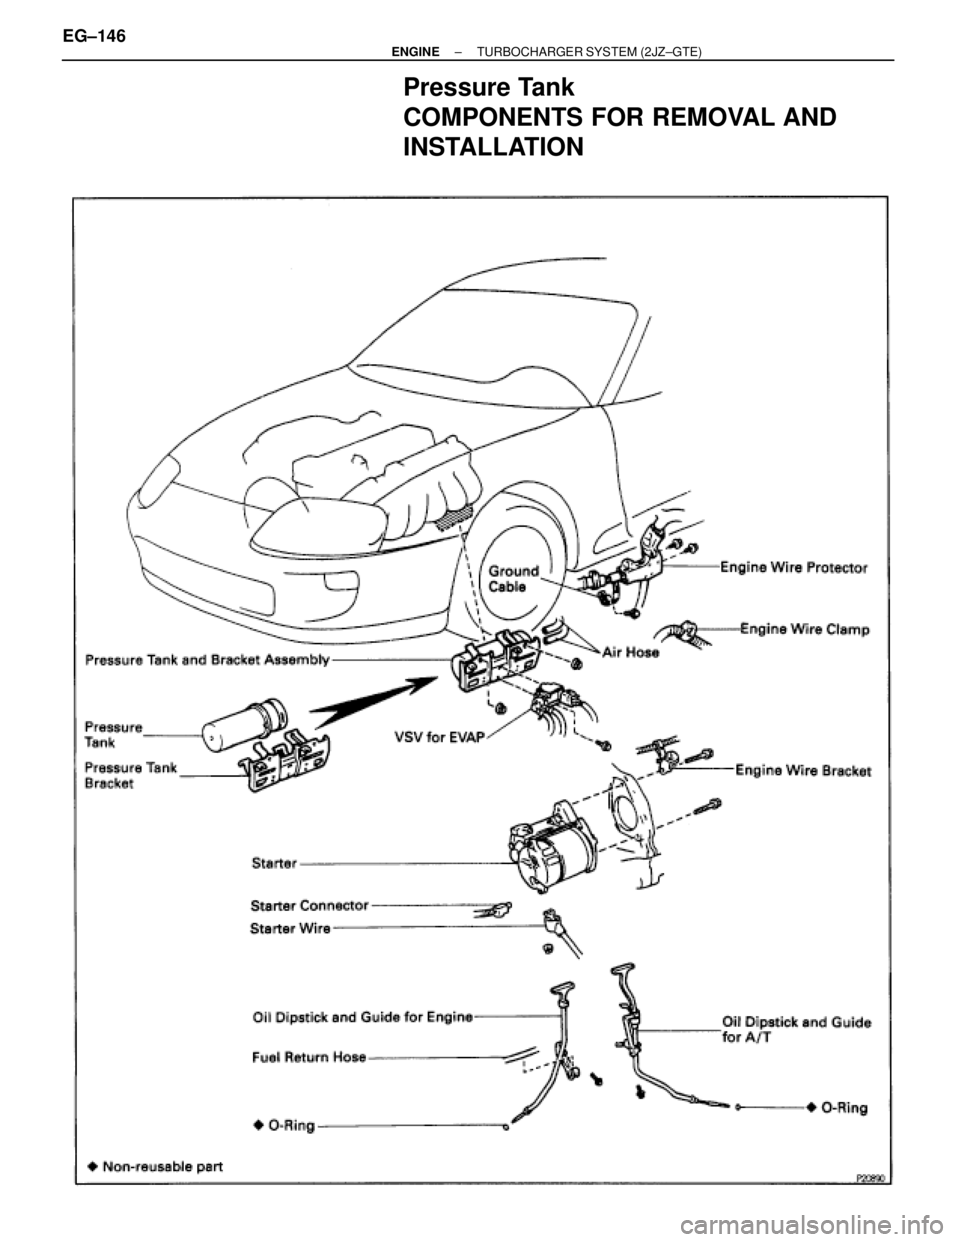 TOYOTA SUPRA 1986  Service Repair Manual Pressure Tank
COMPONENTS FOR REMOVAL AND
INSTALLATION
EG±146± ENGINETURBOCHARGER SYSTEM (2JZ±GTE) 